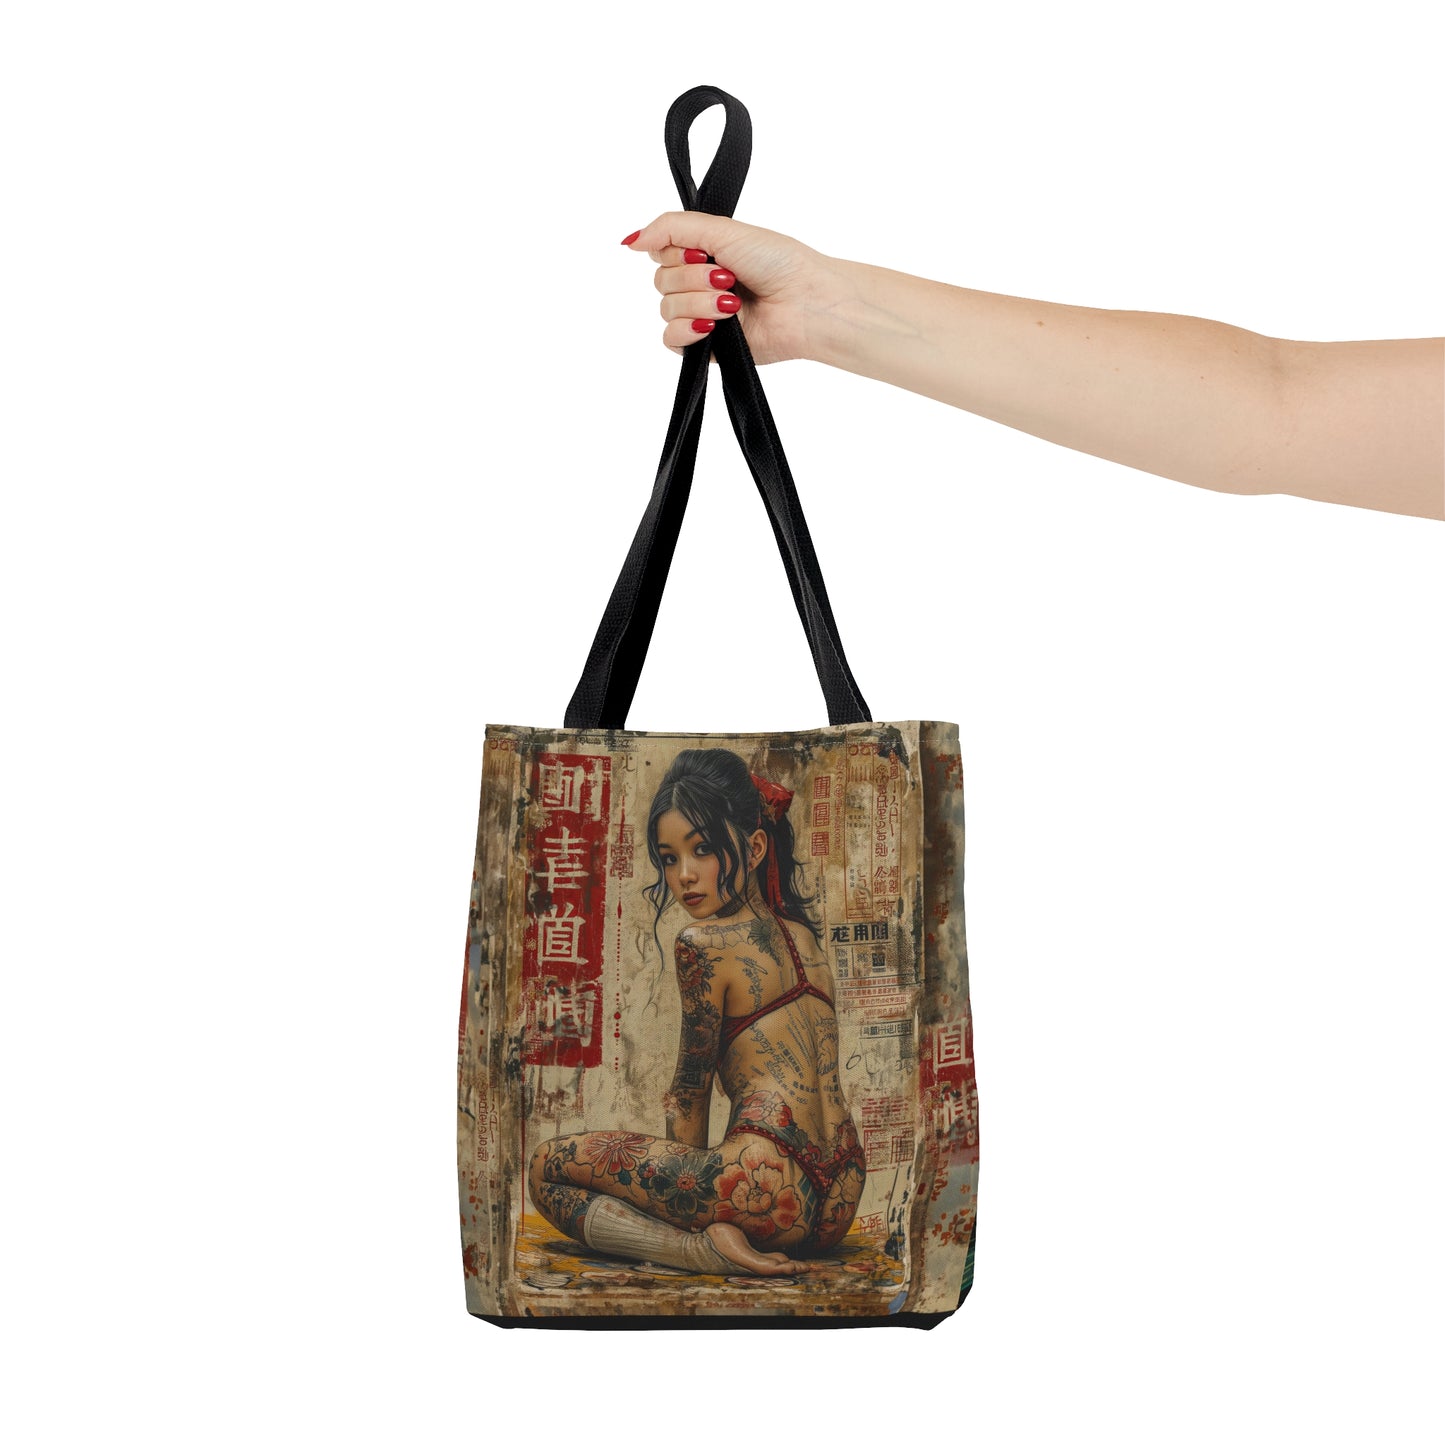 Gorgeous tattooed Asian woman Tote Bag